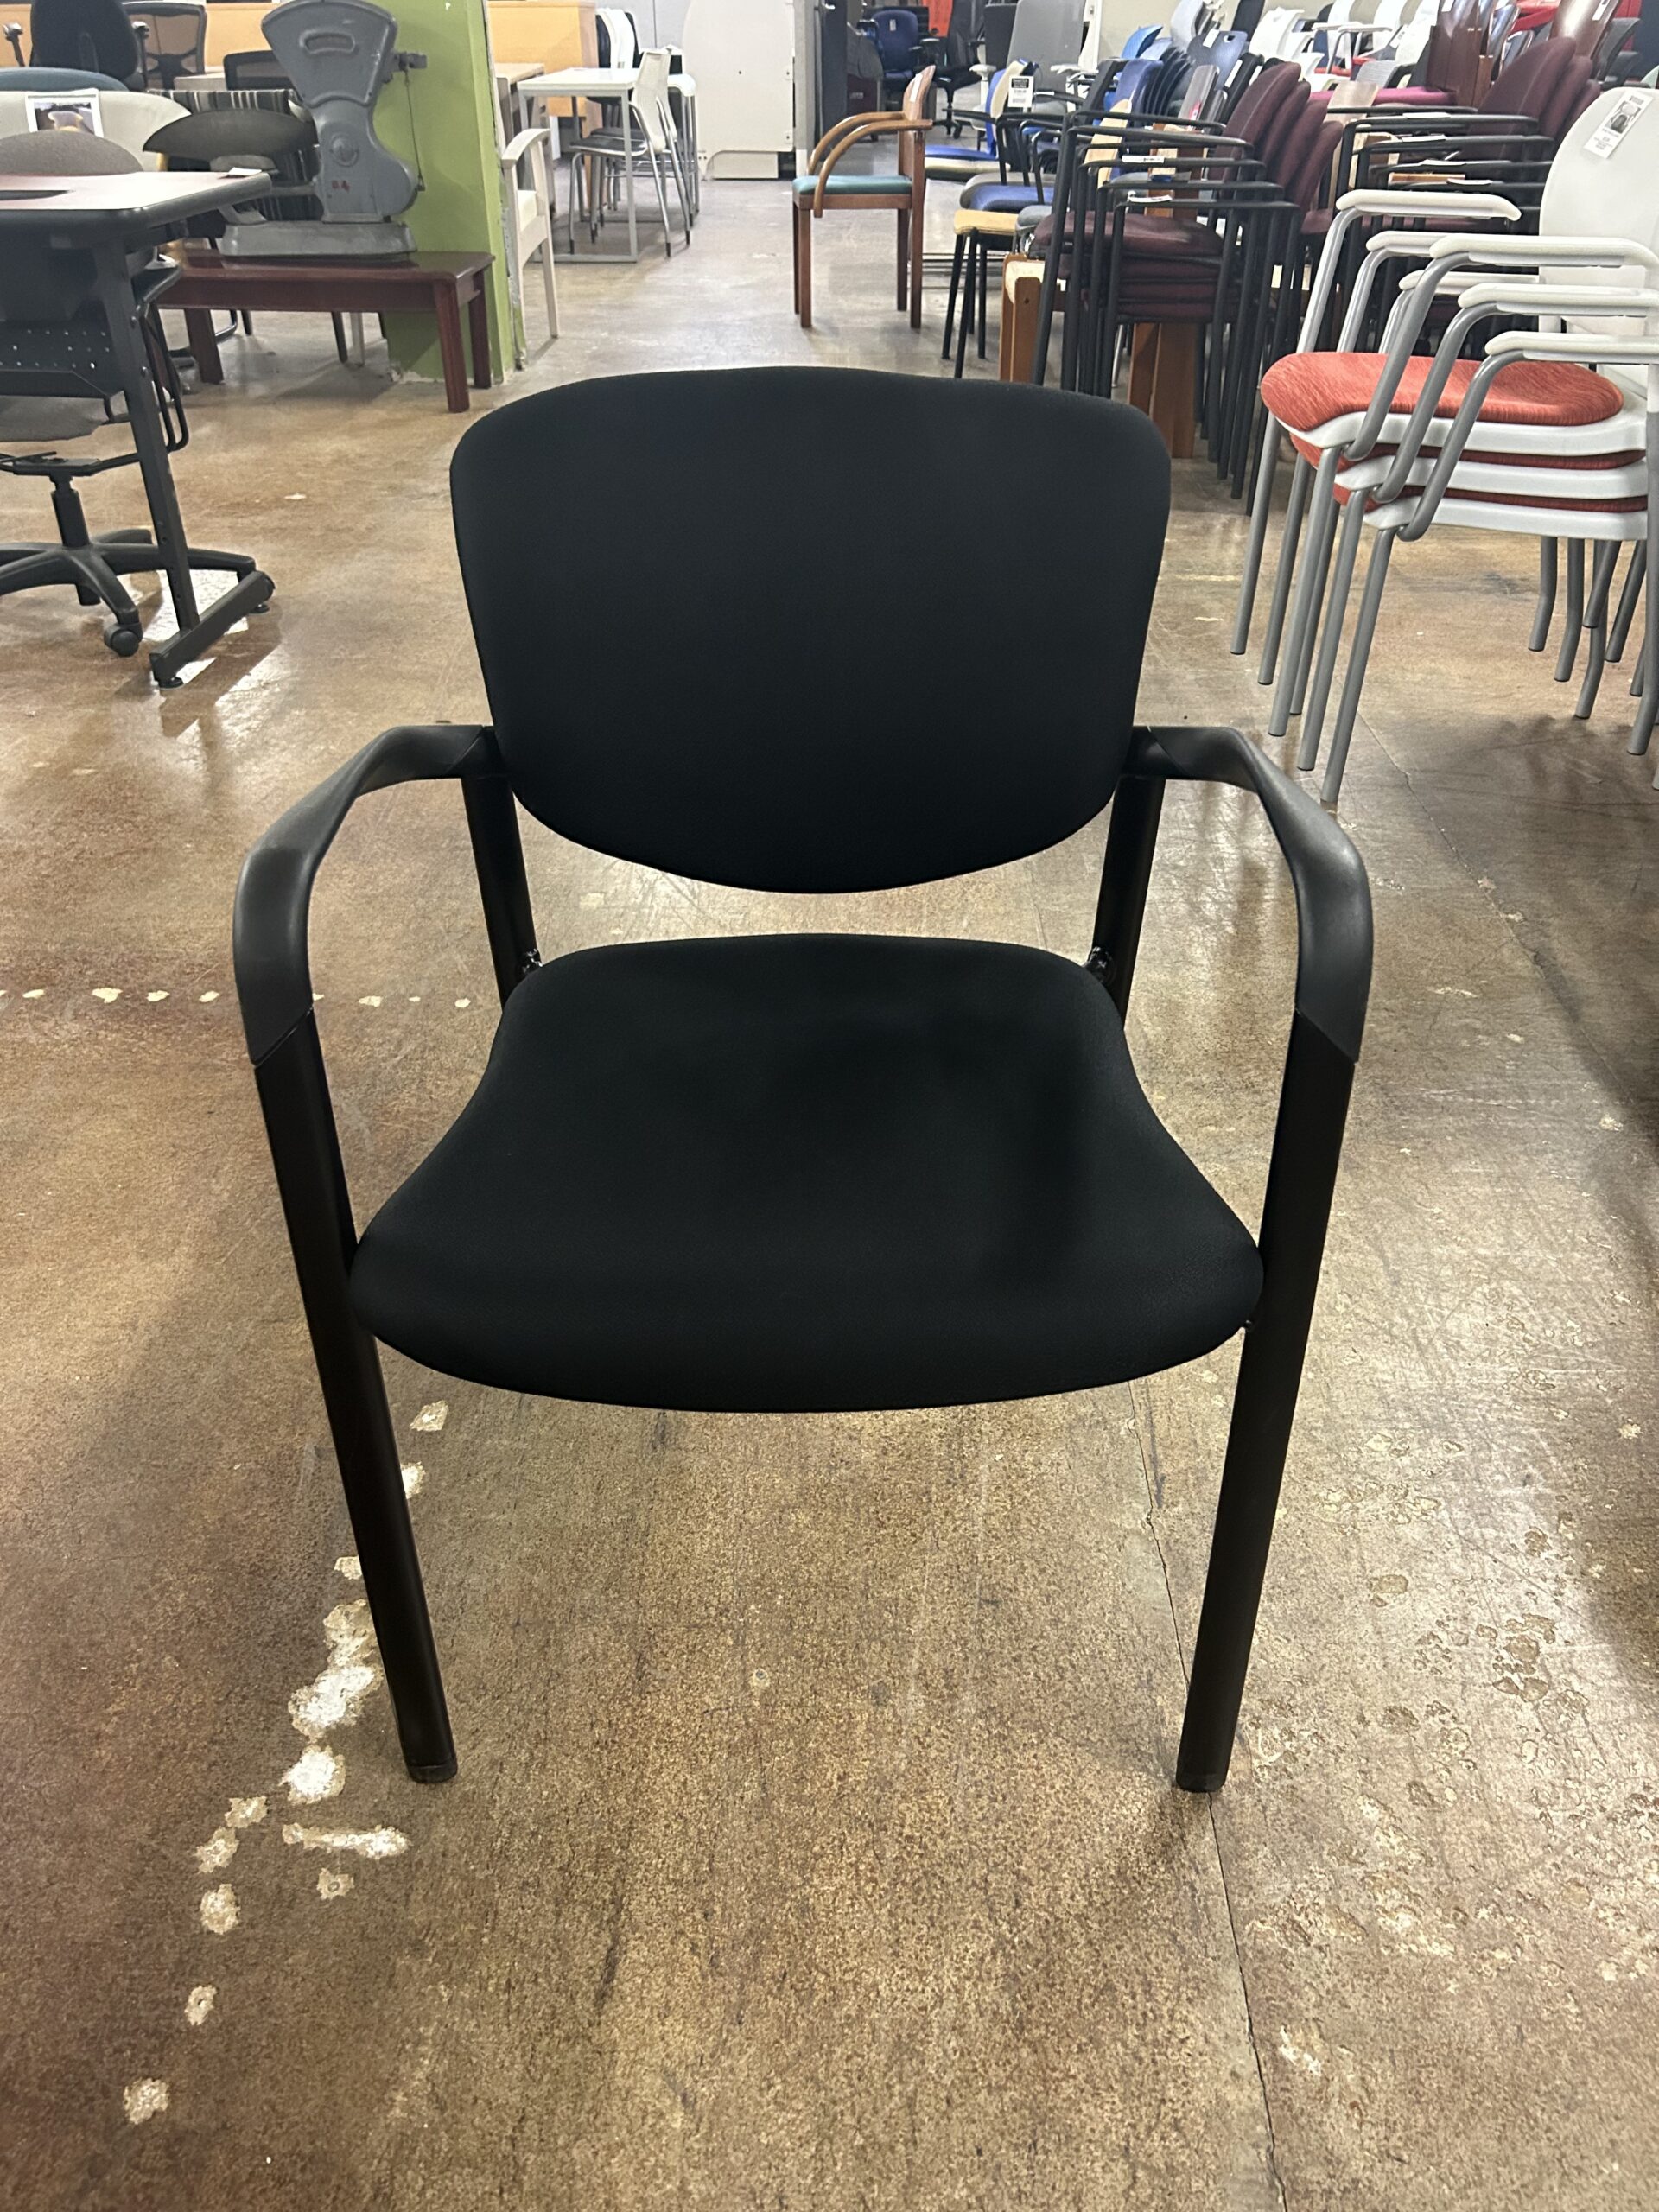 Used Black Haworth Improv Side Chair with Arms Stackable